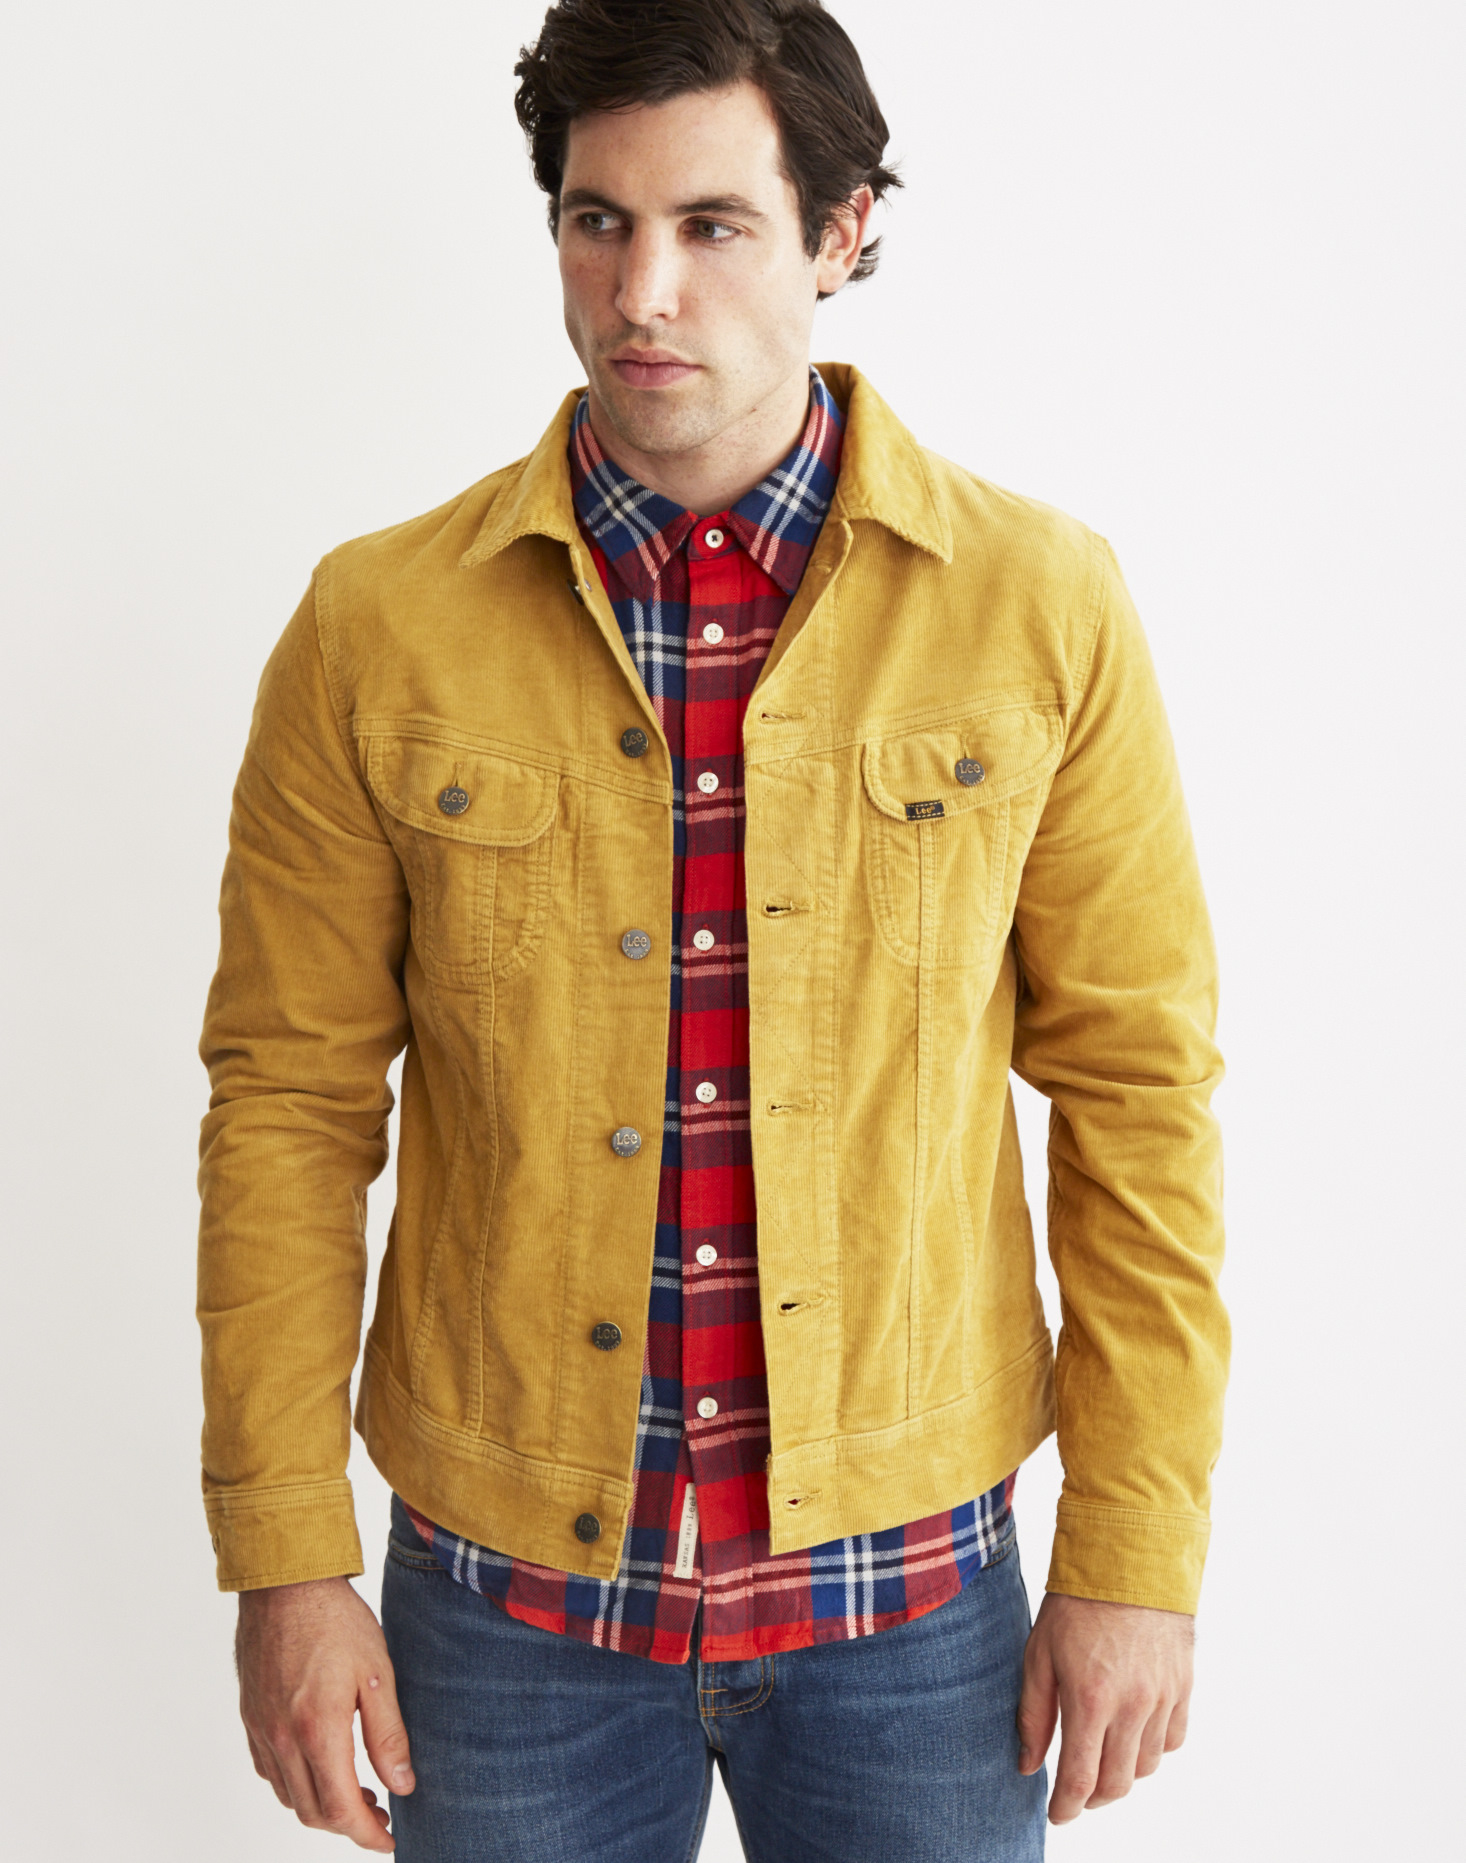 Lyst - Lee Jeans Rider Jacket Honey in Yellow for Men